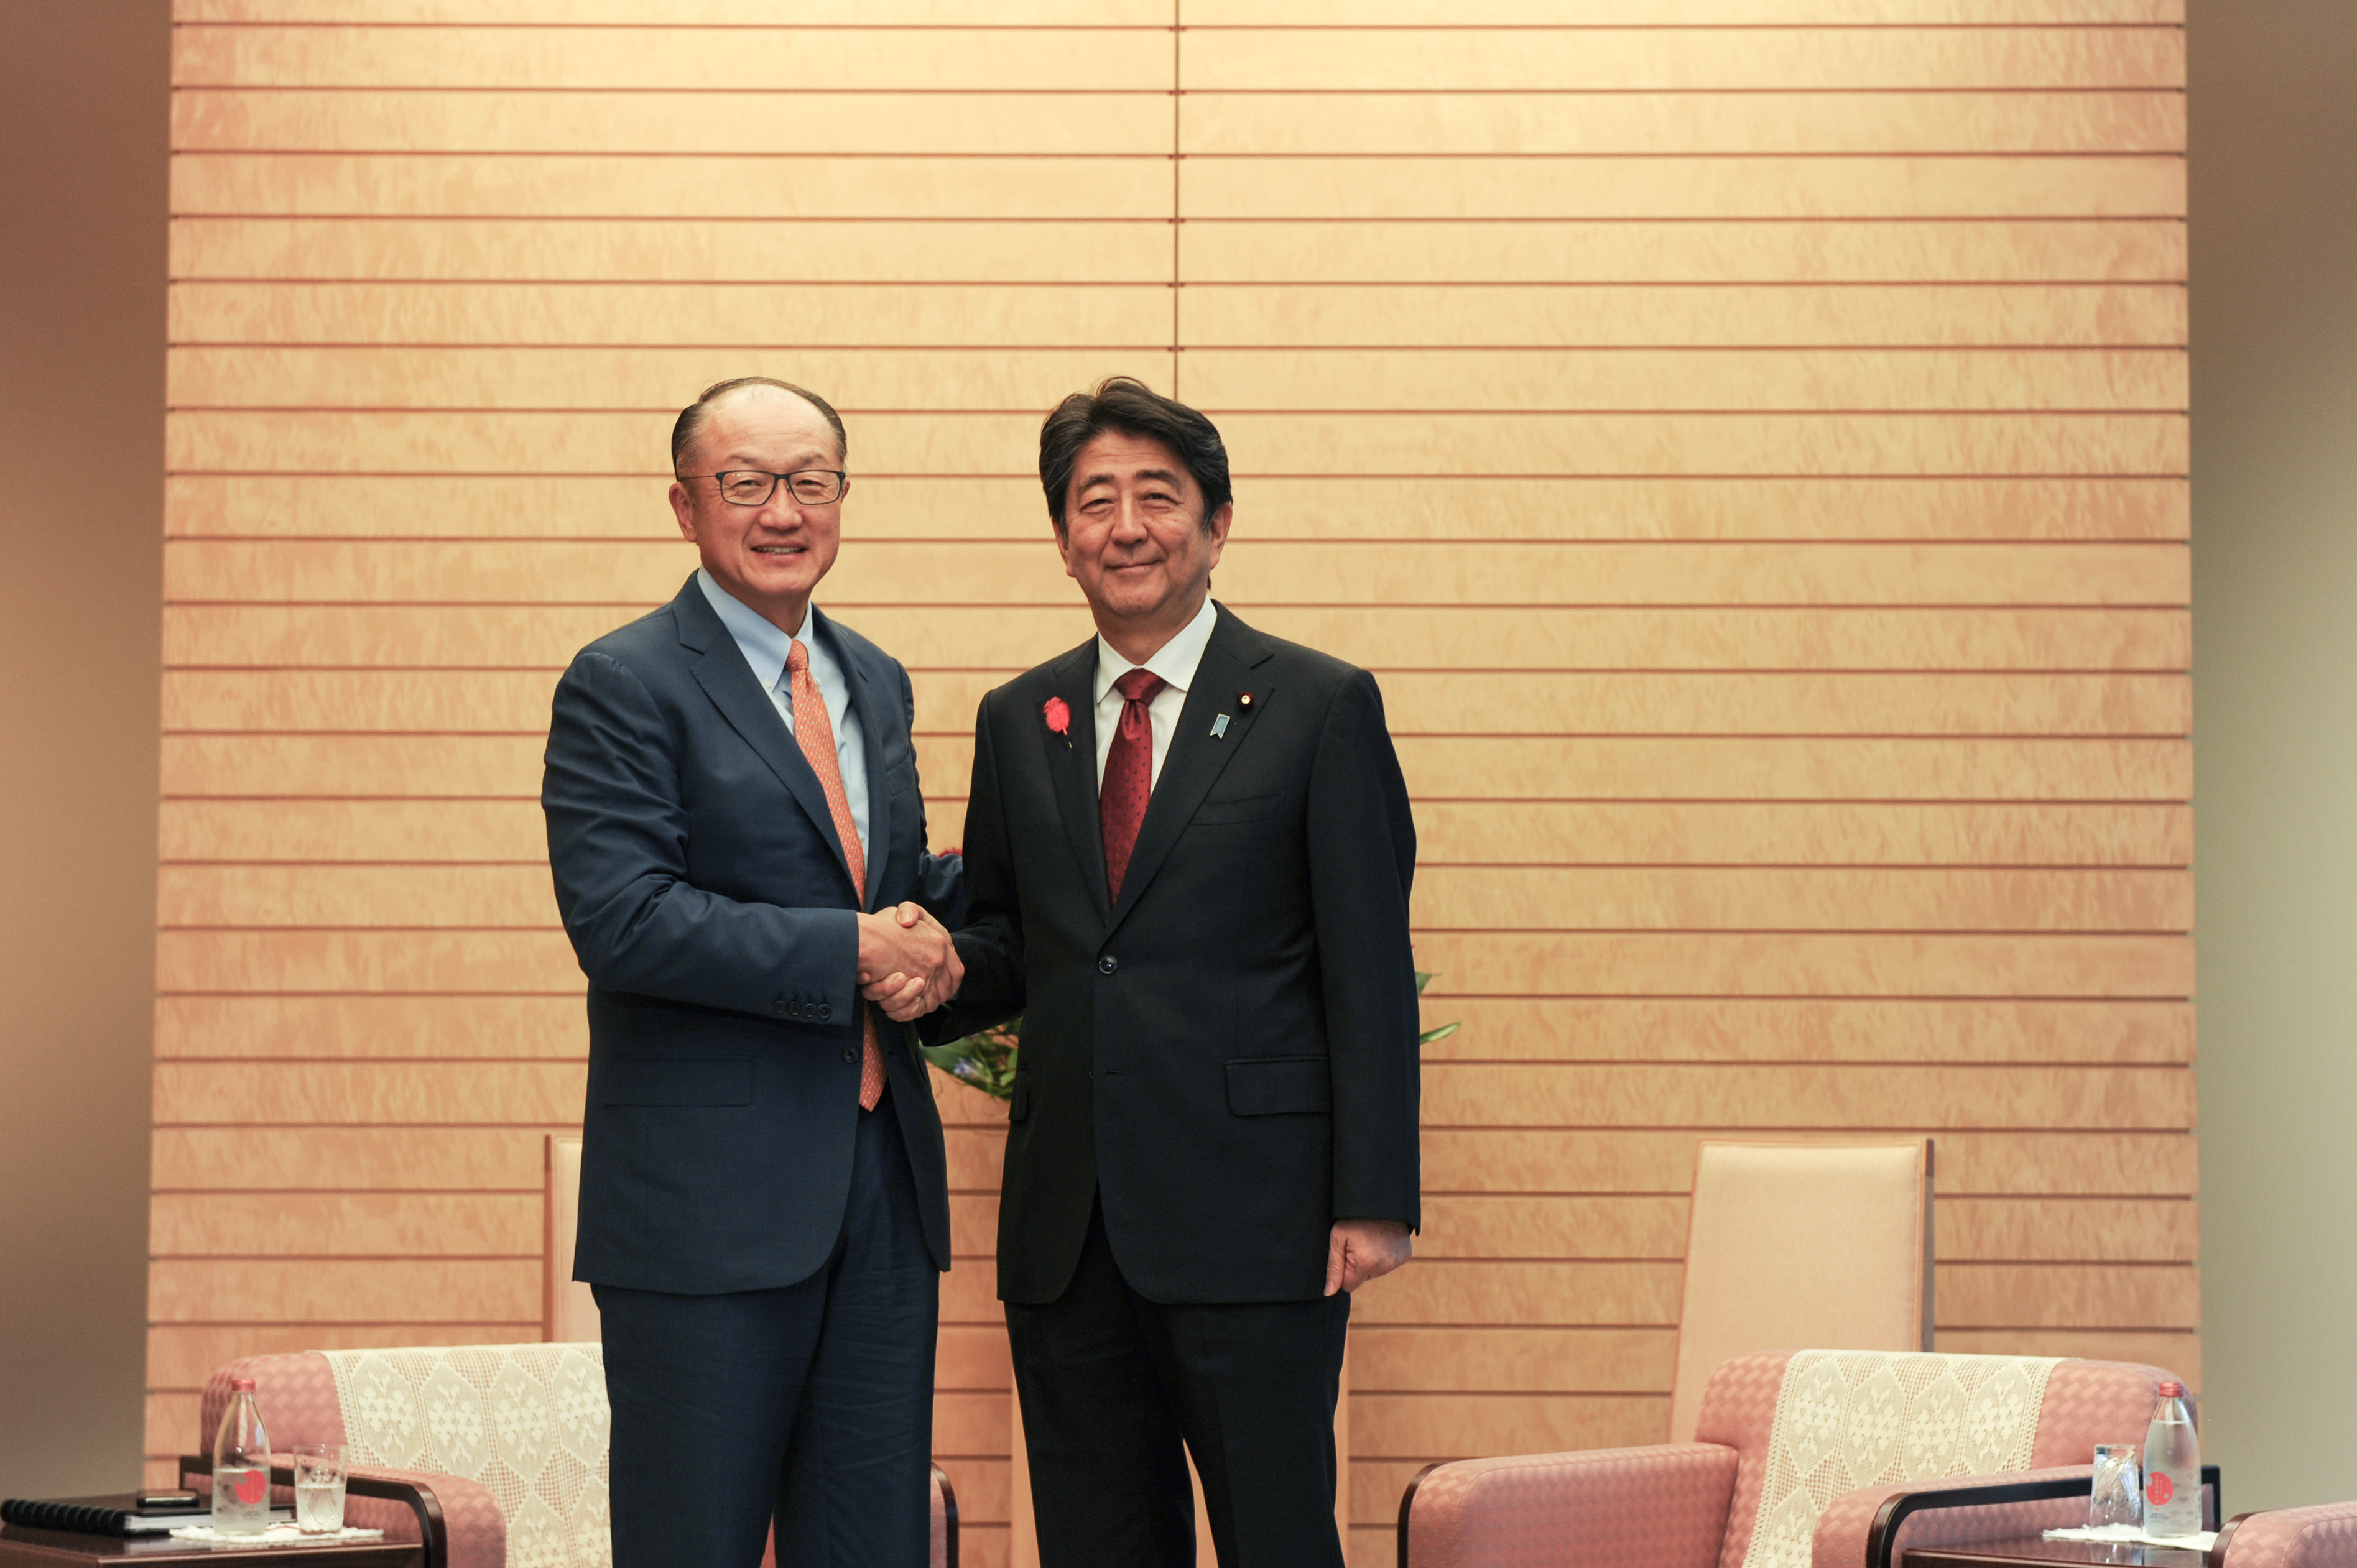 Japanese Prime Minister Shinzo Abe (photo credit: World Bank Photo Collection/flickr)